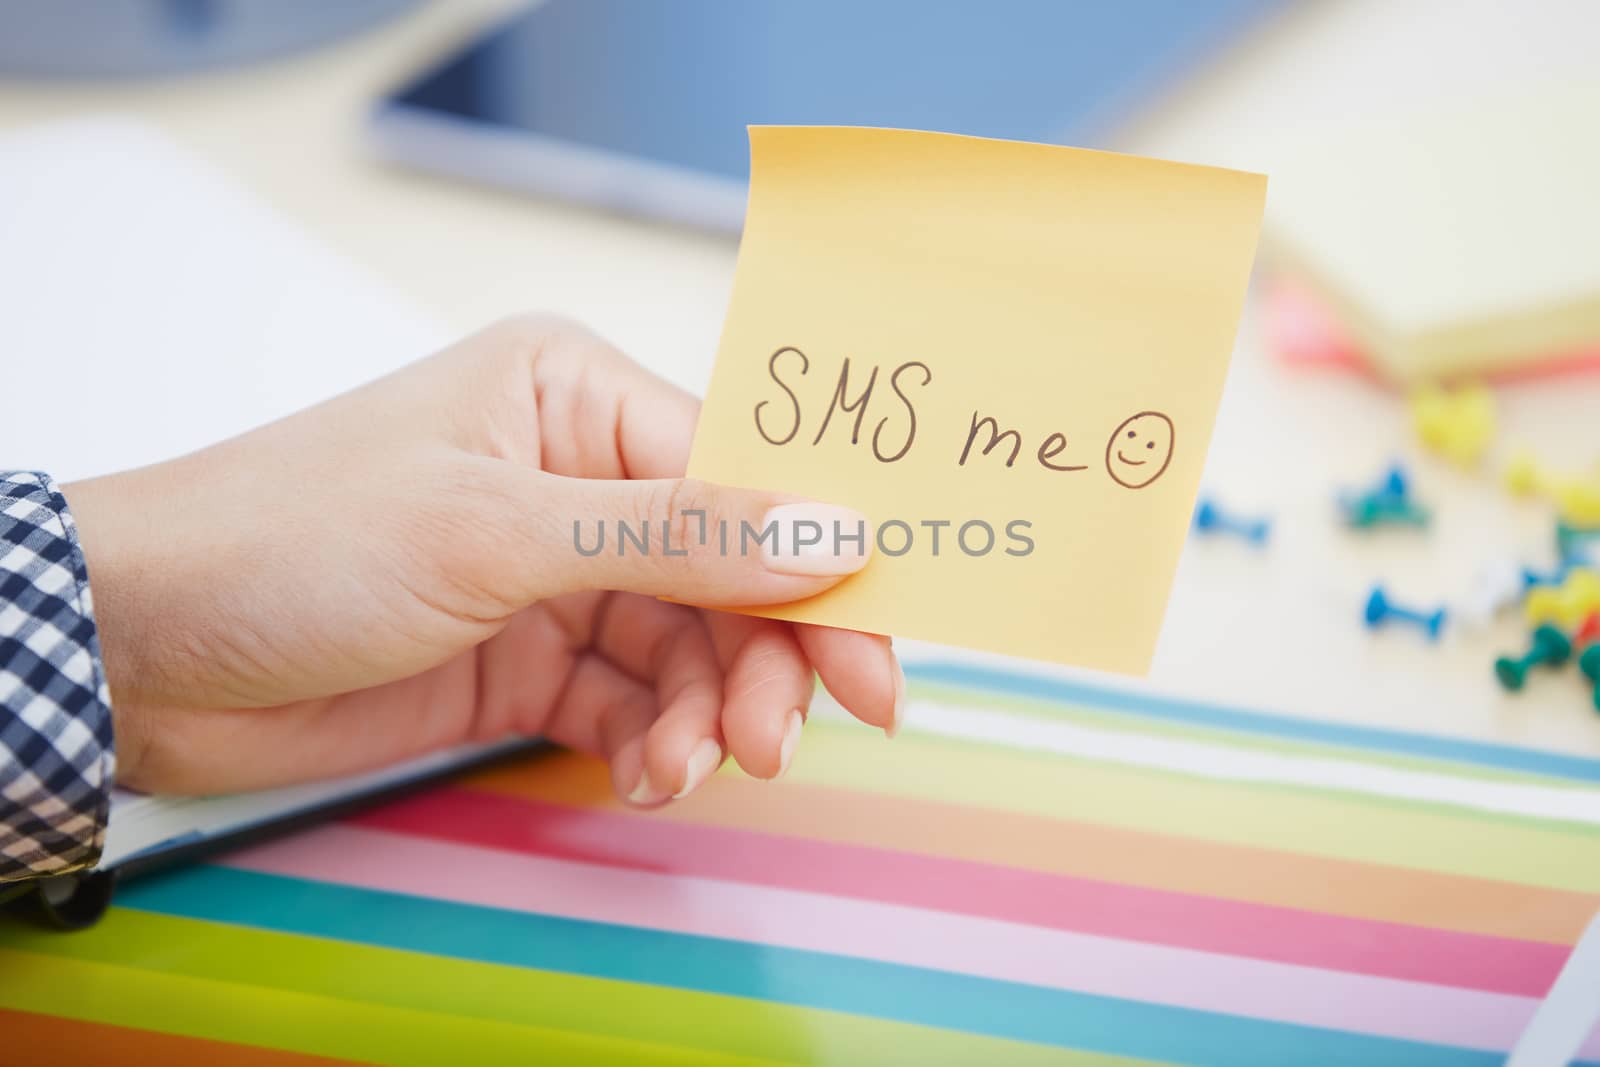 SMS me text on adhesive note by Novic